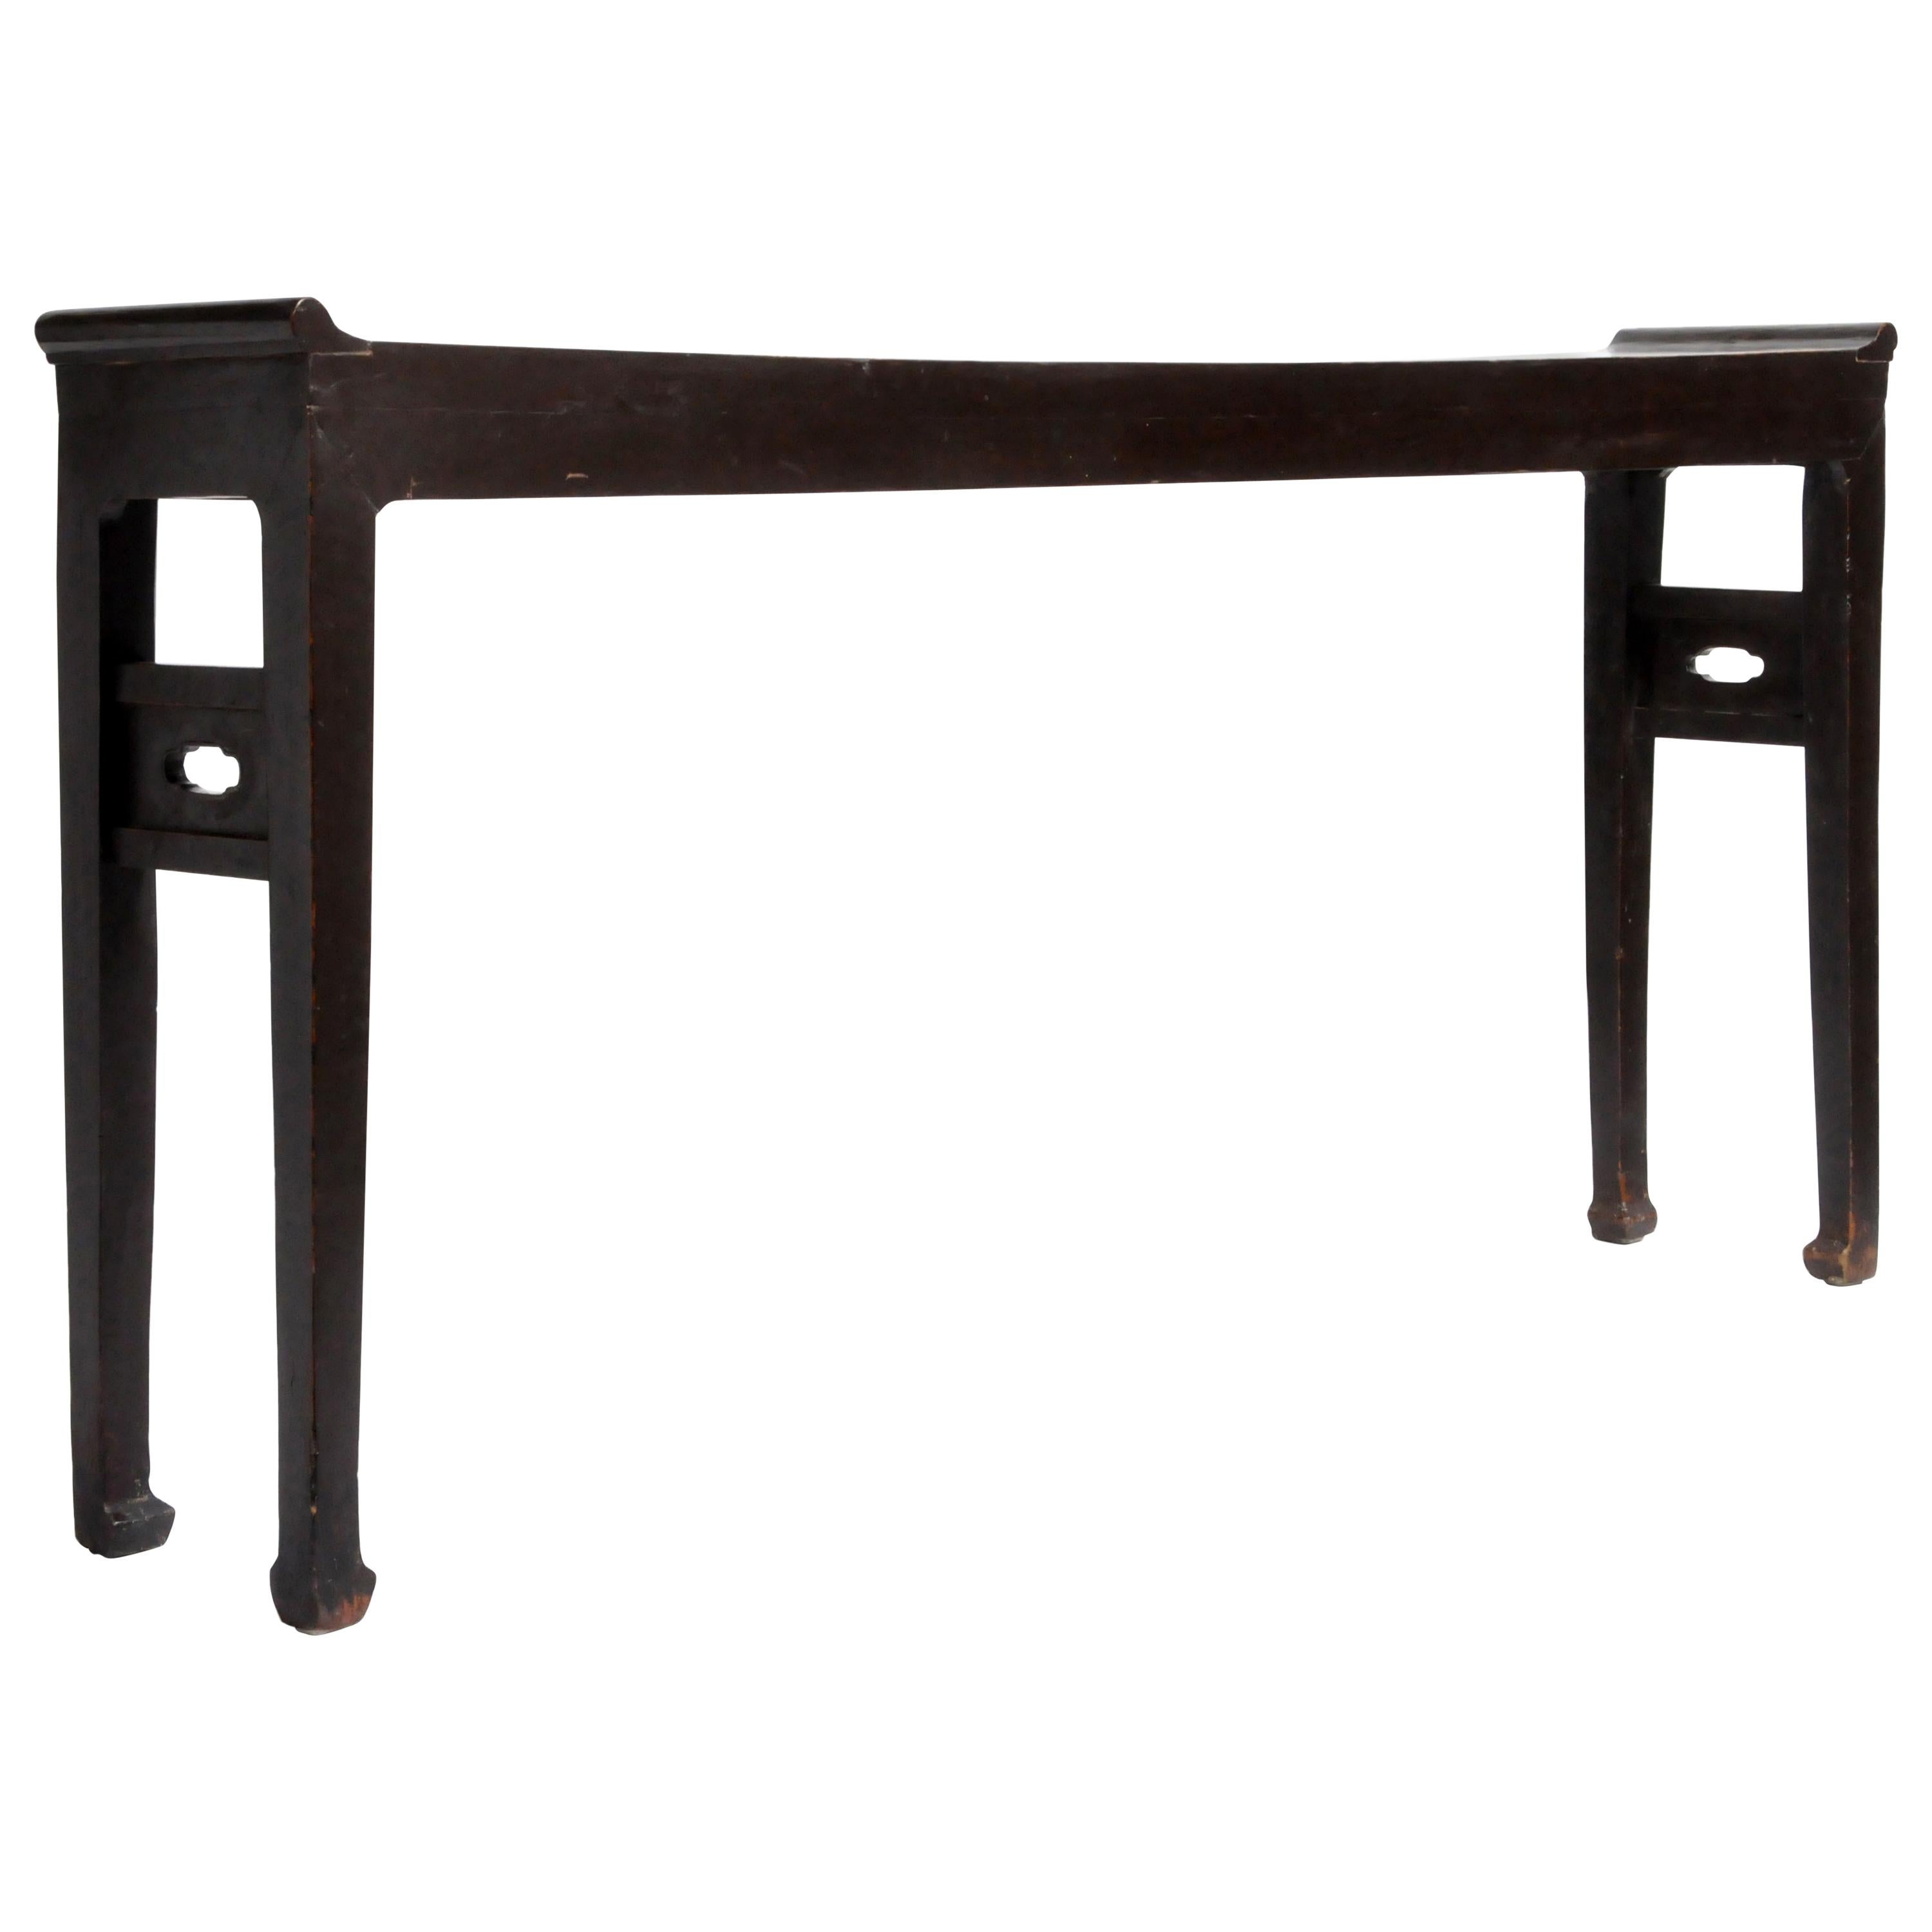 Qing Dynasty Chinese Altar Table with Hoofed-Legs